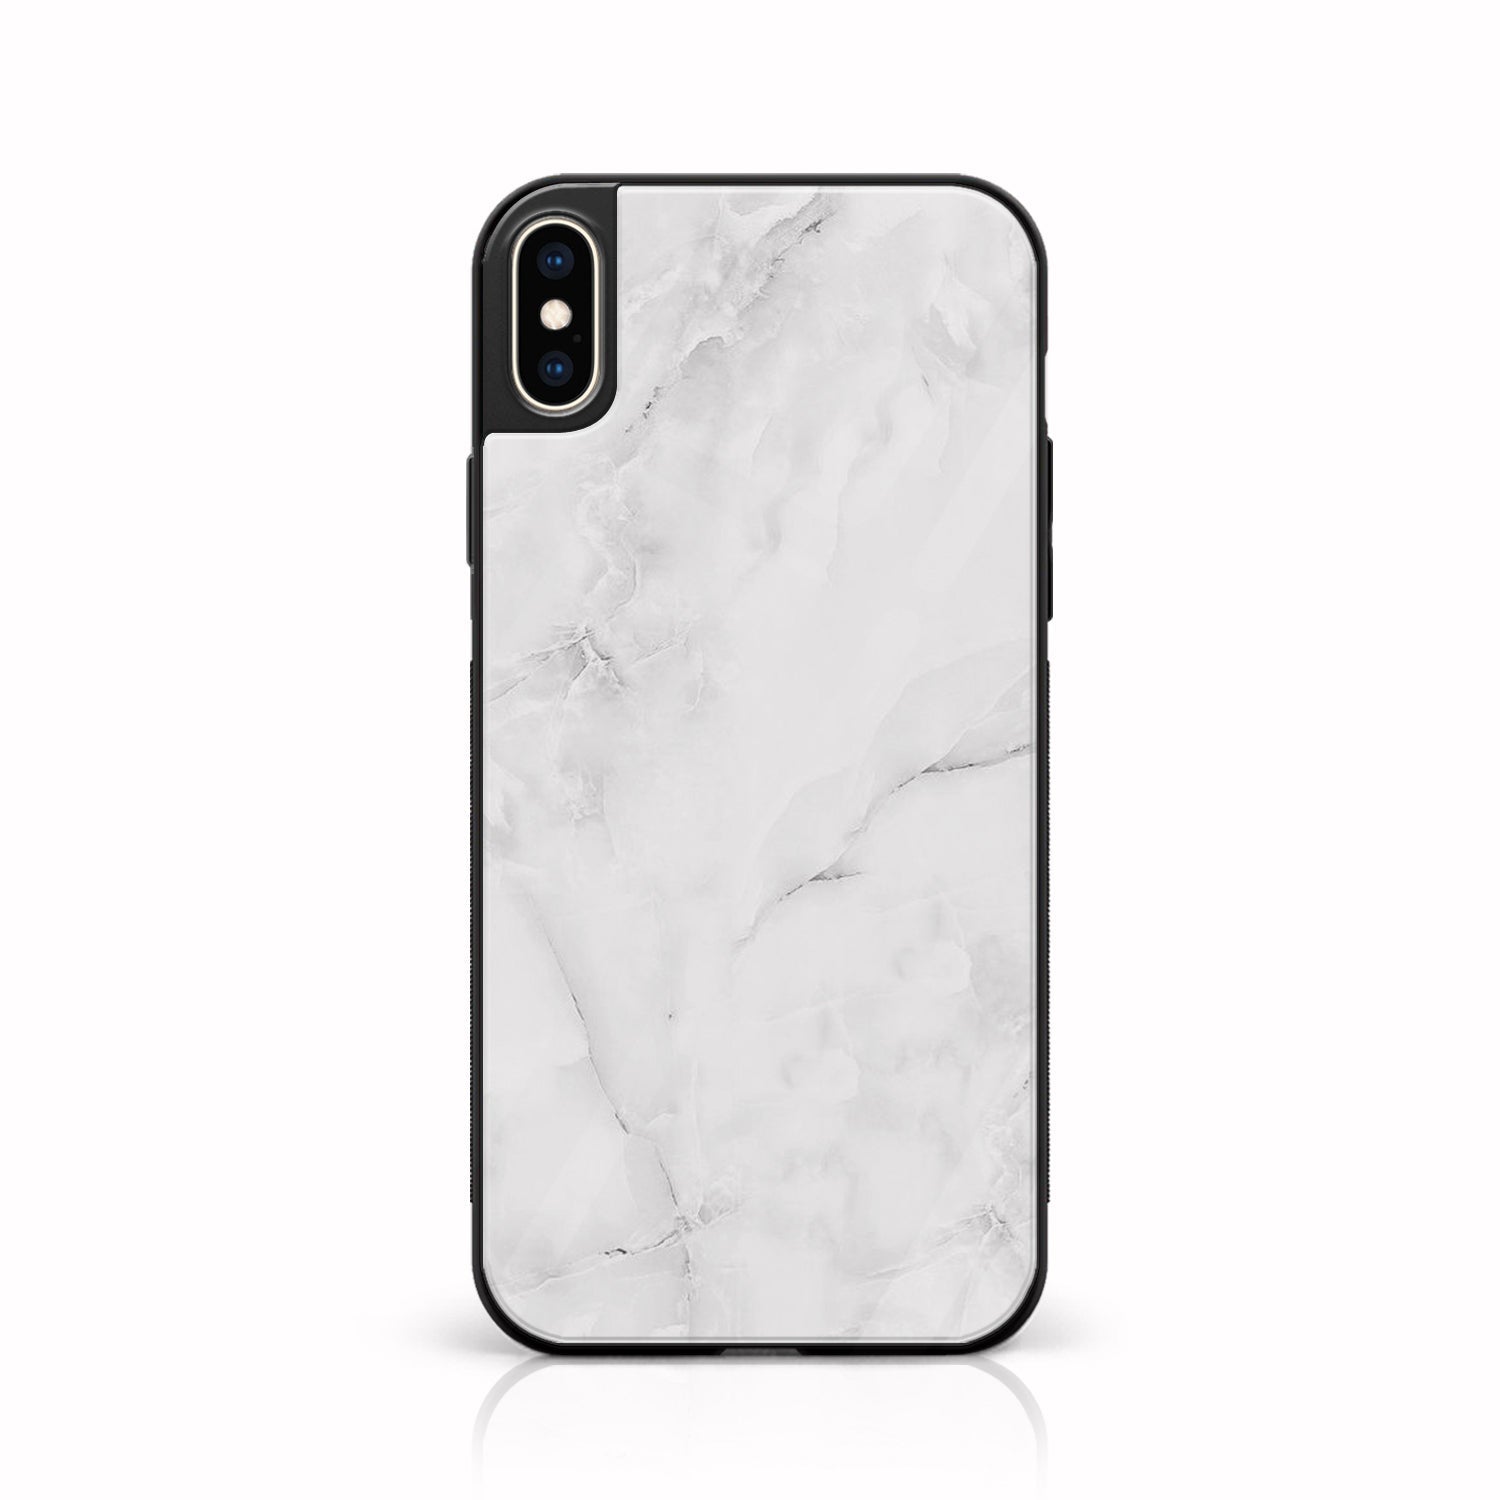 iPhone X/XS - White Marble Series - Premium Printed Glass soft Bumper shock Proof Case